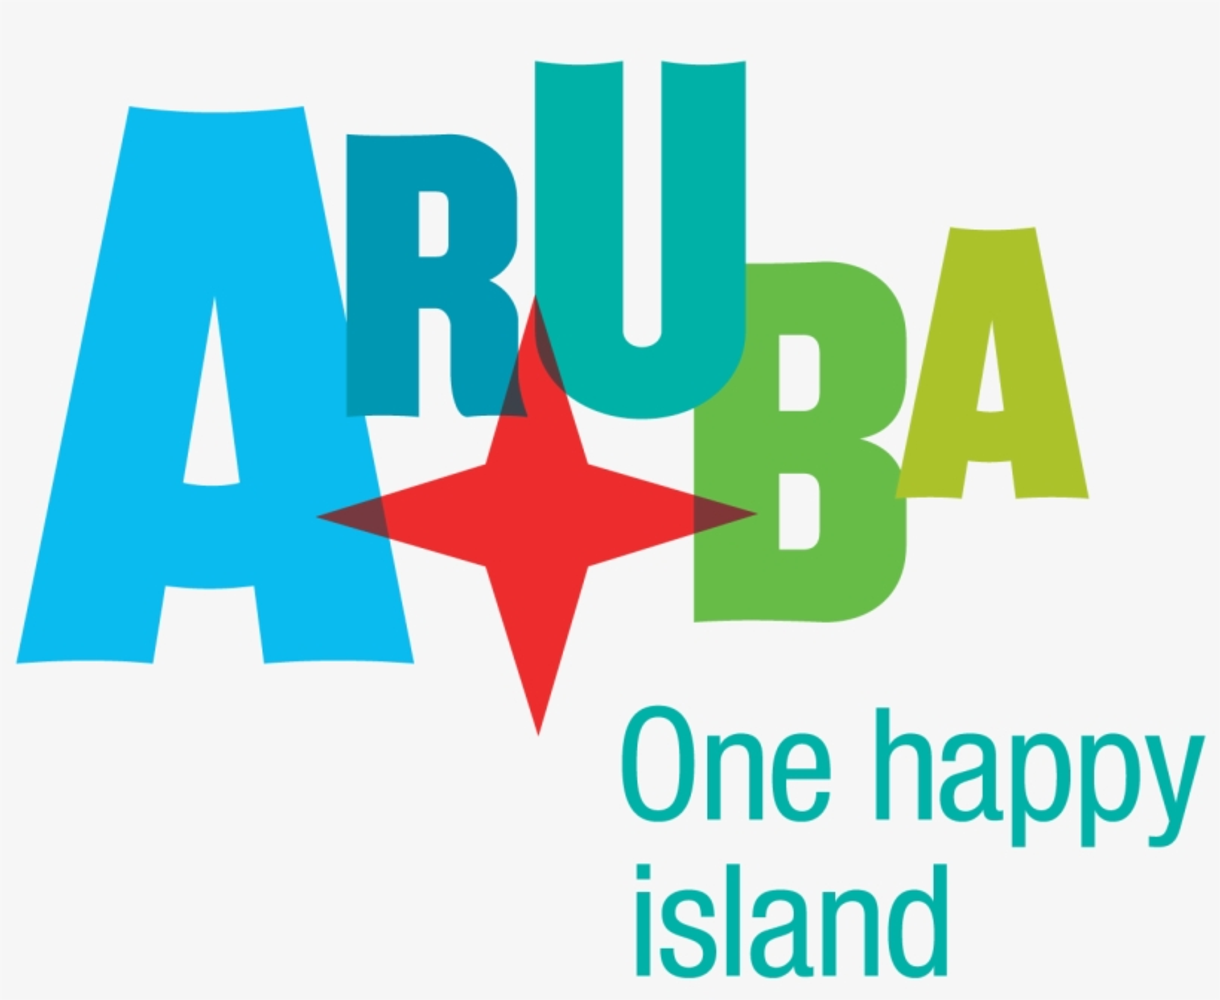 Let's Get REAL and HEAL in the HAPPY ISLAND ARUBA